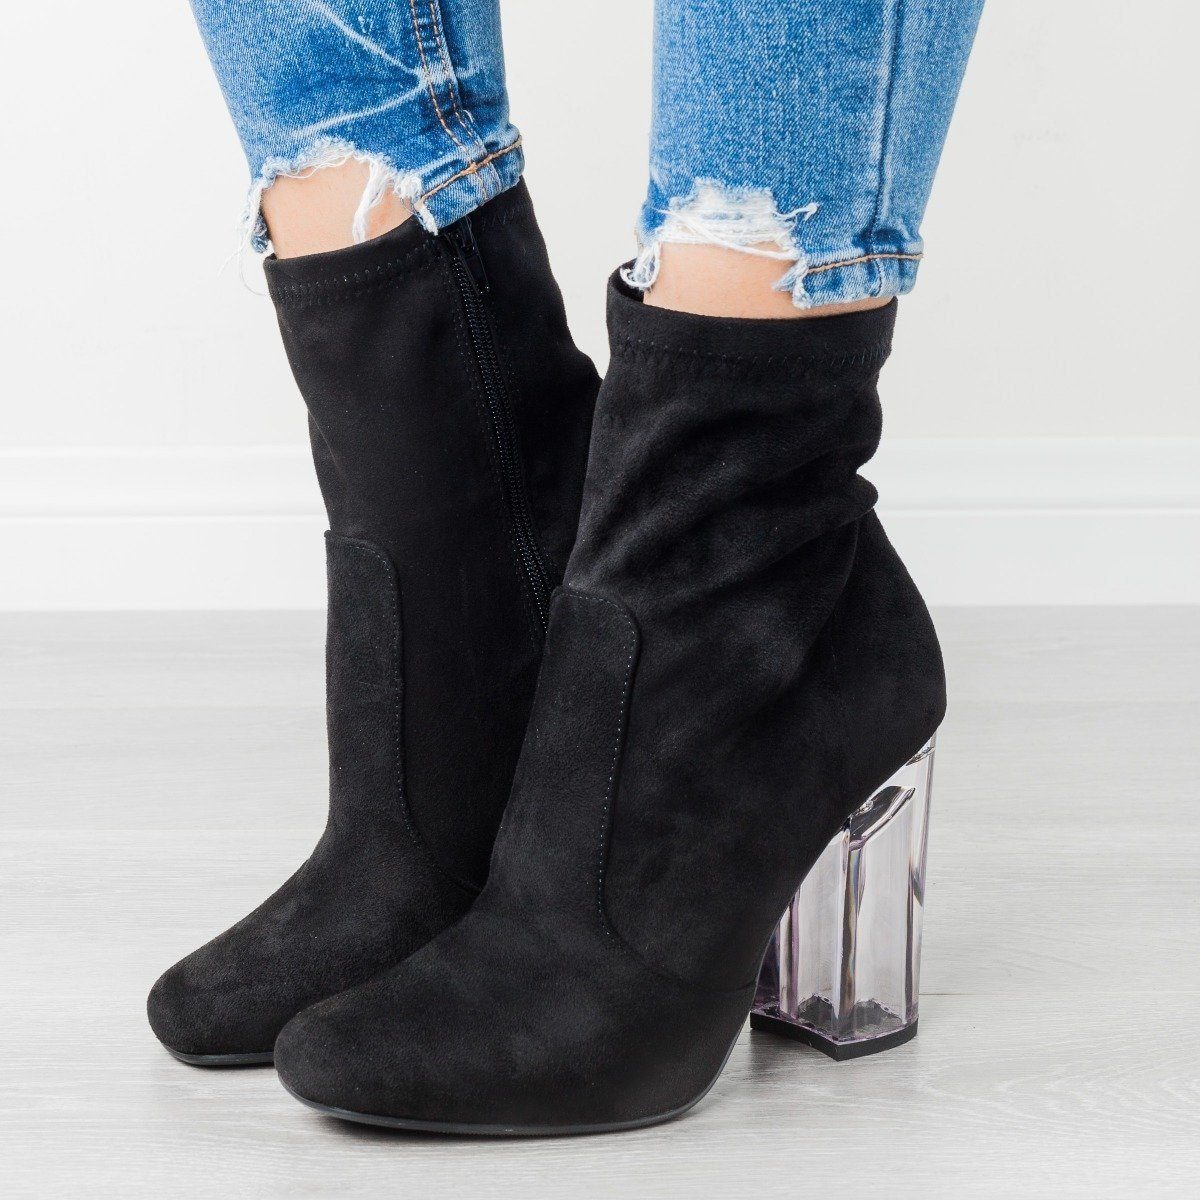 clear heel boots outfit